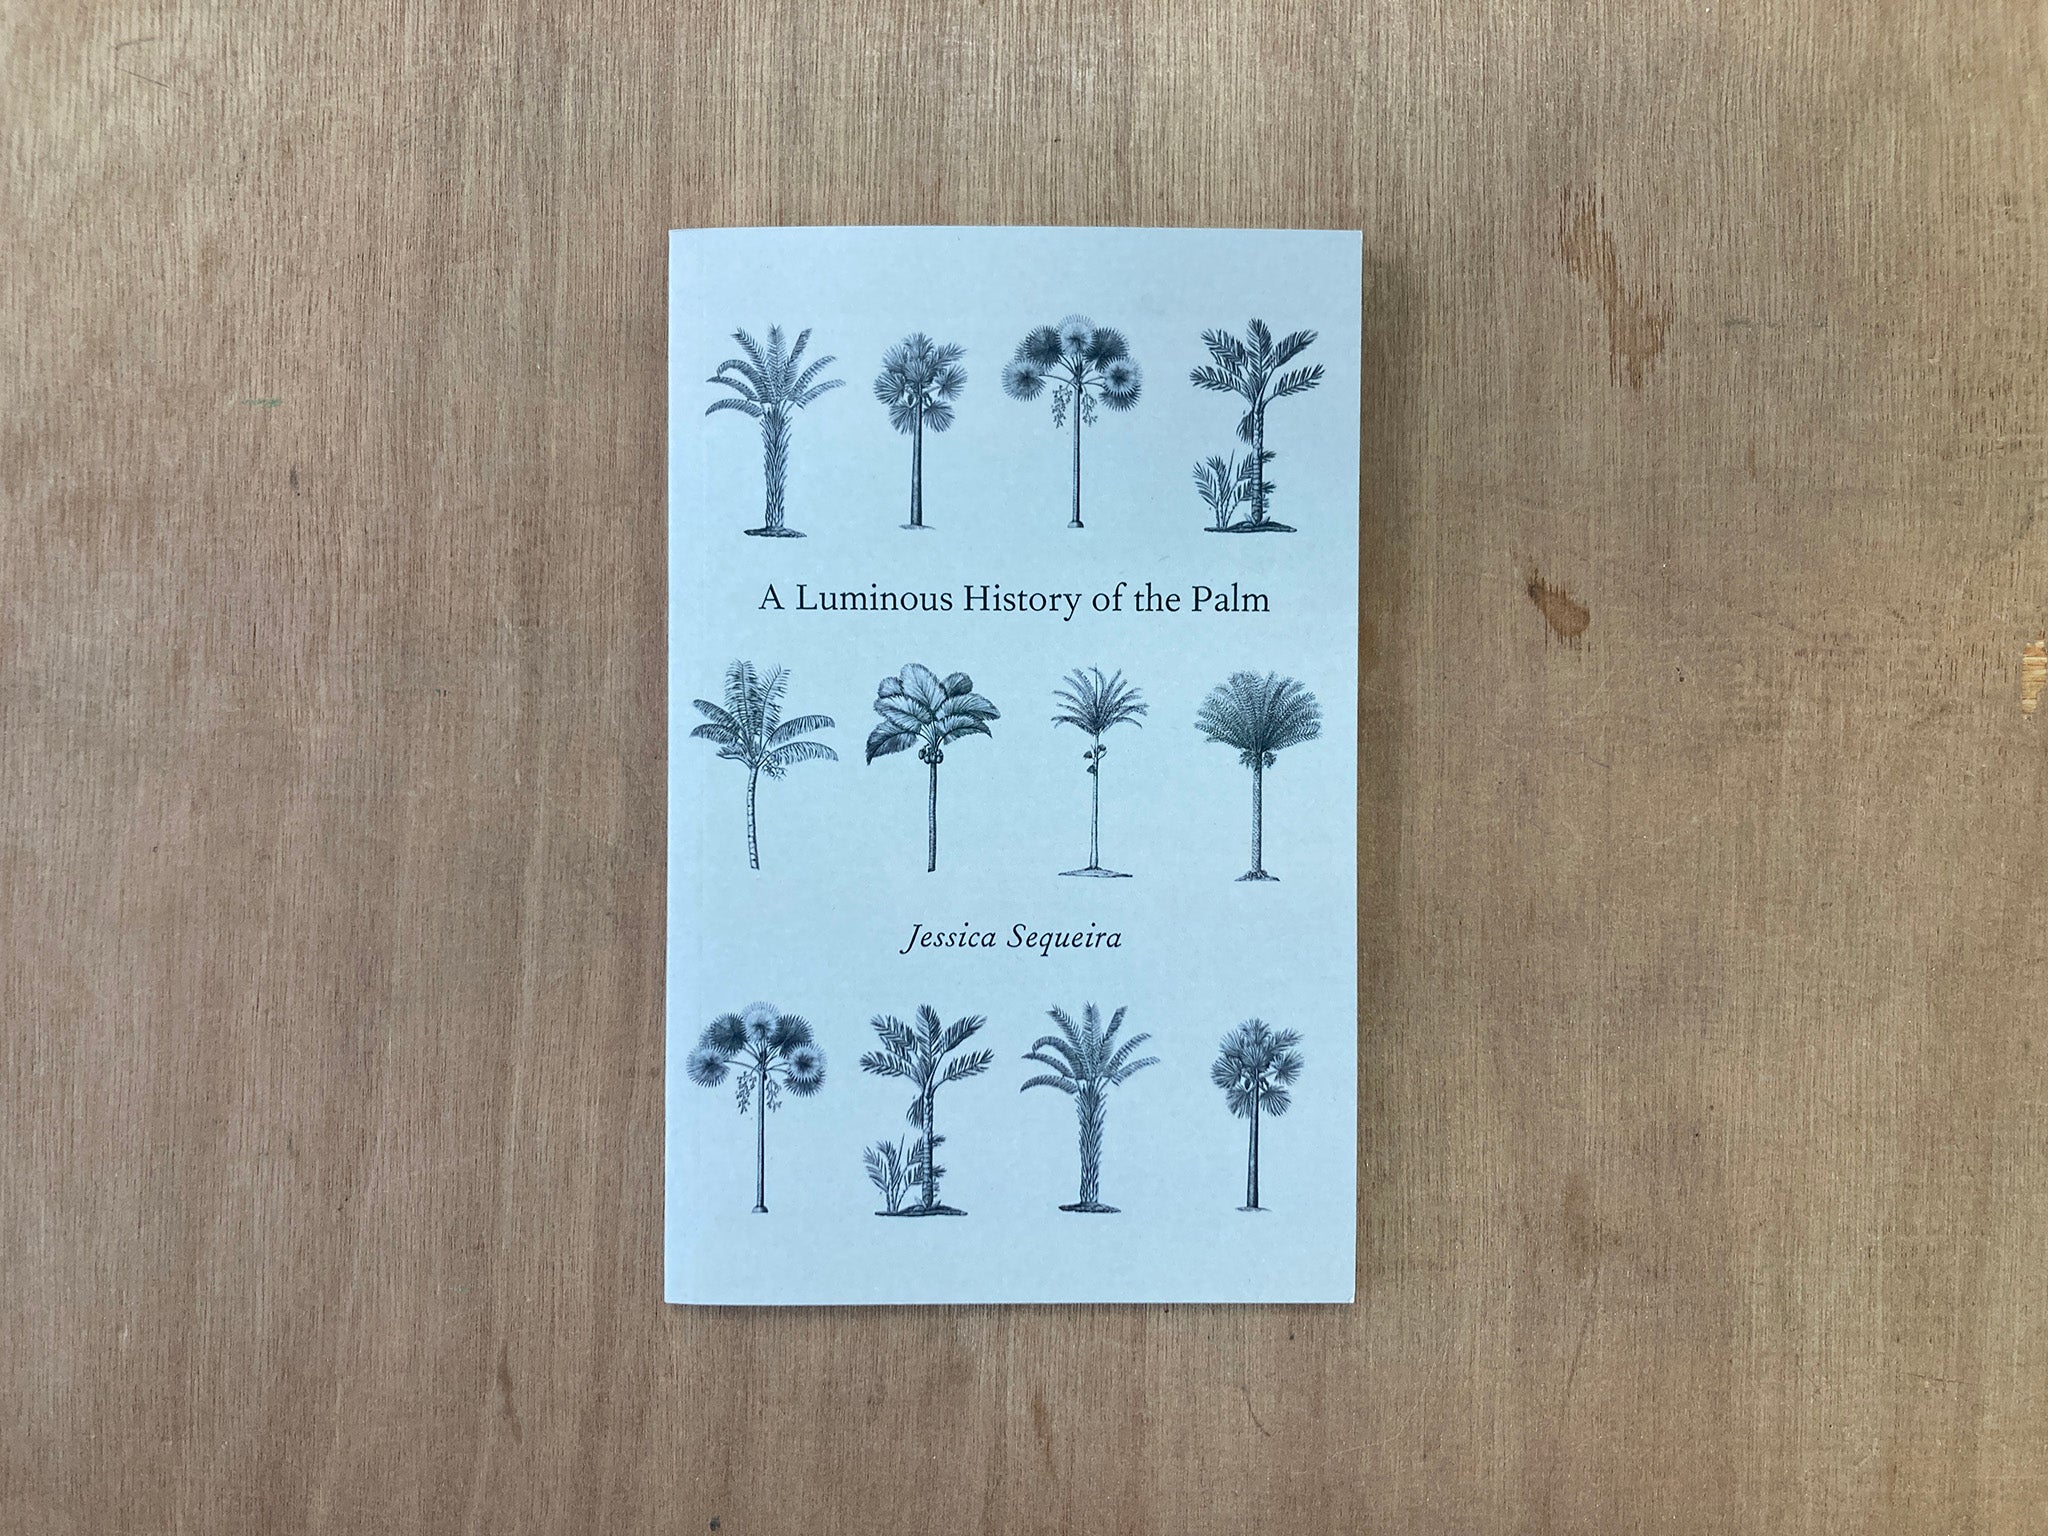 A LUMINOUS HISTORY OF THE PALM by Jessica Sequeira